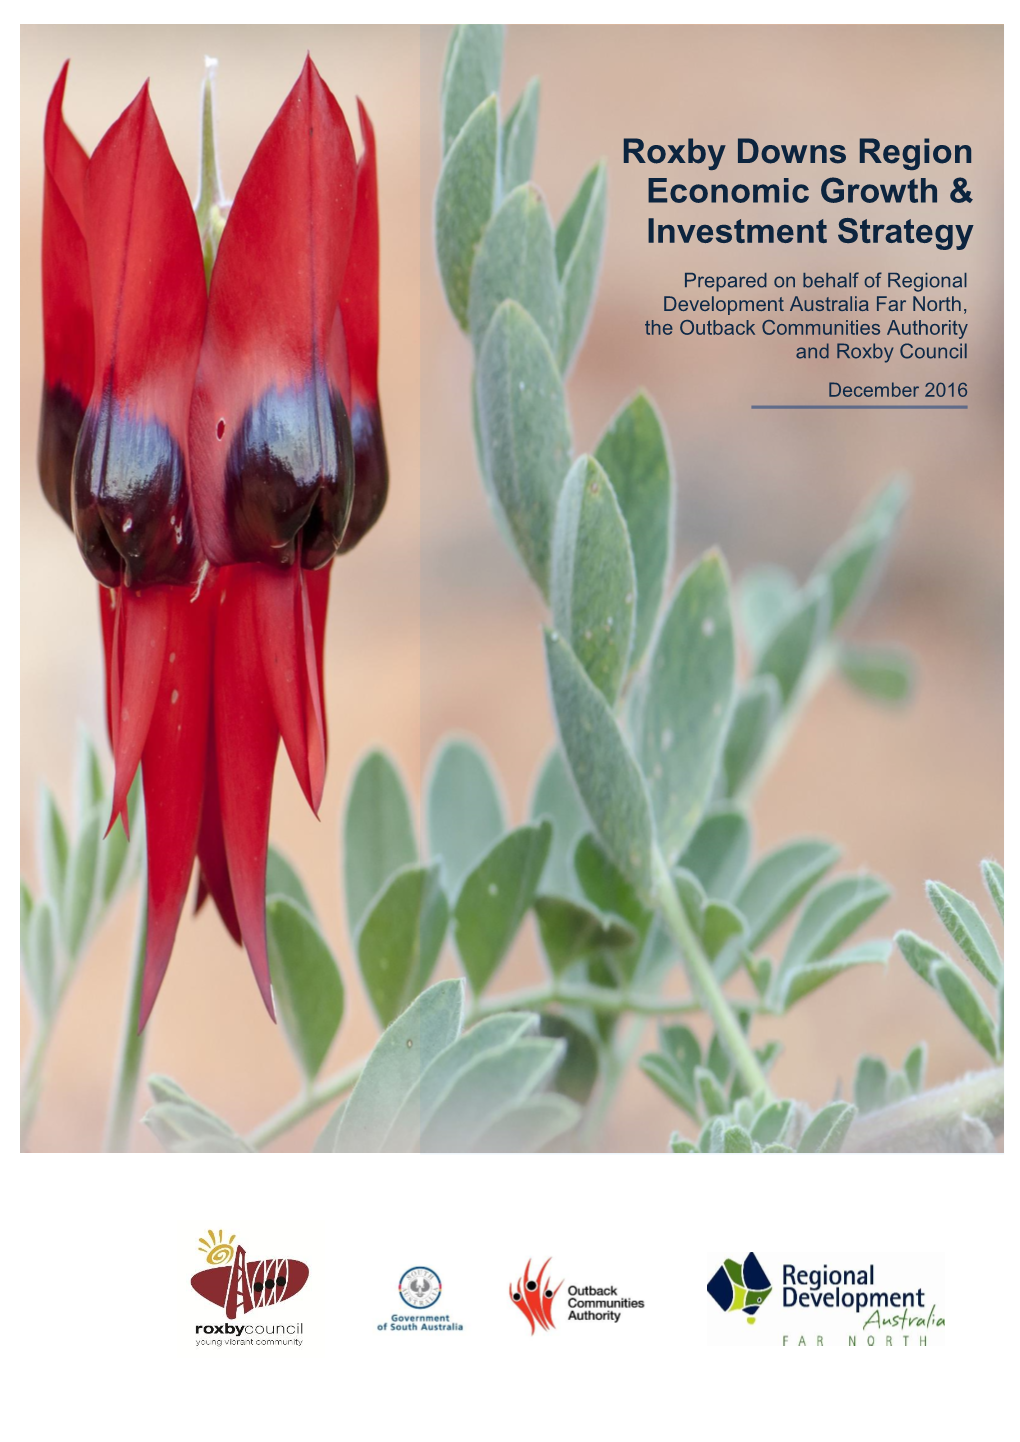 Roxby Downs Region Economic Growth & Investment Strategy